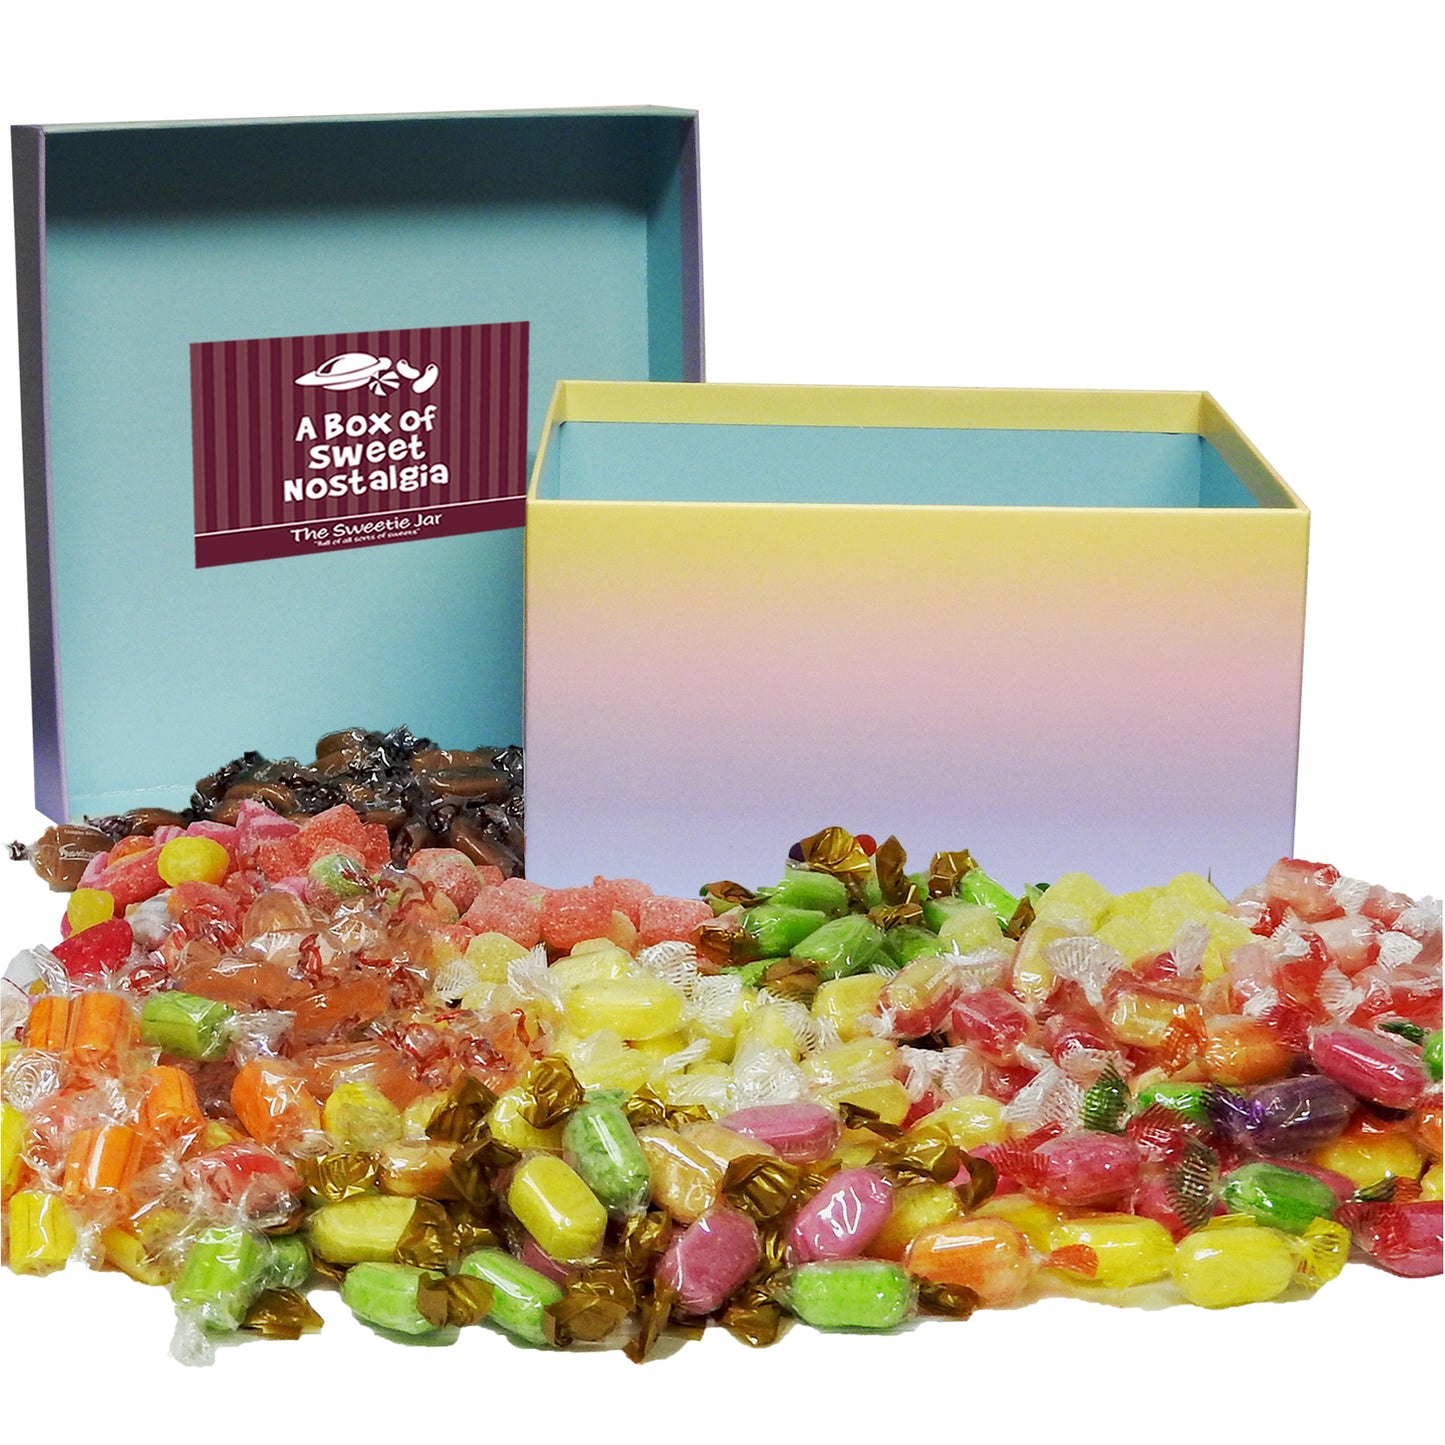 Boiled Sweets Gift Box - Retro Sweets Gifts at The Sweetie Jar